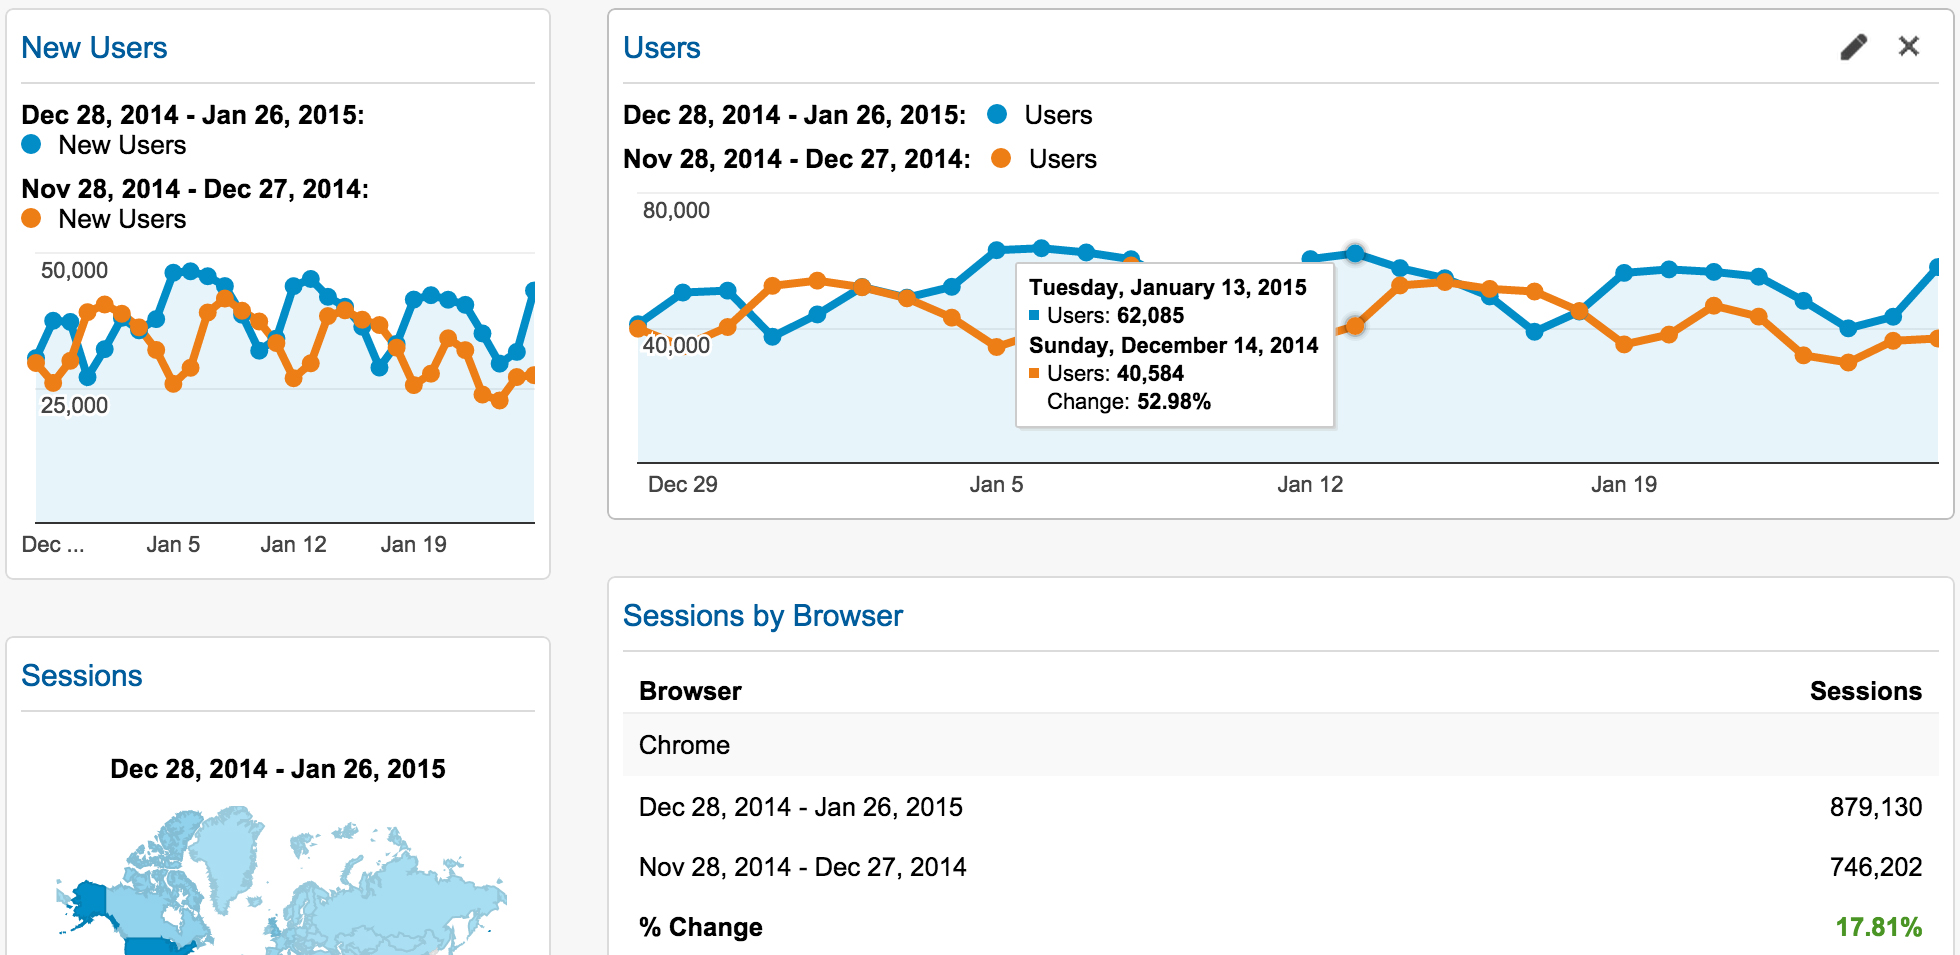 WordPress.com Adds Google Analytics for Business Customers Only